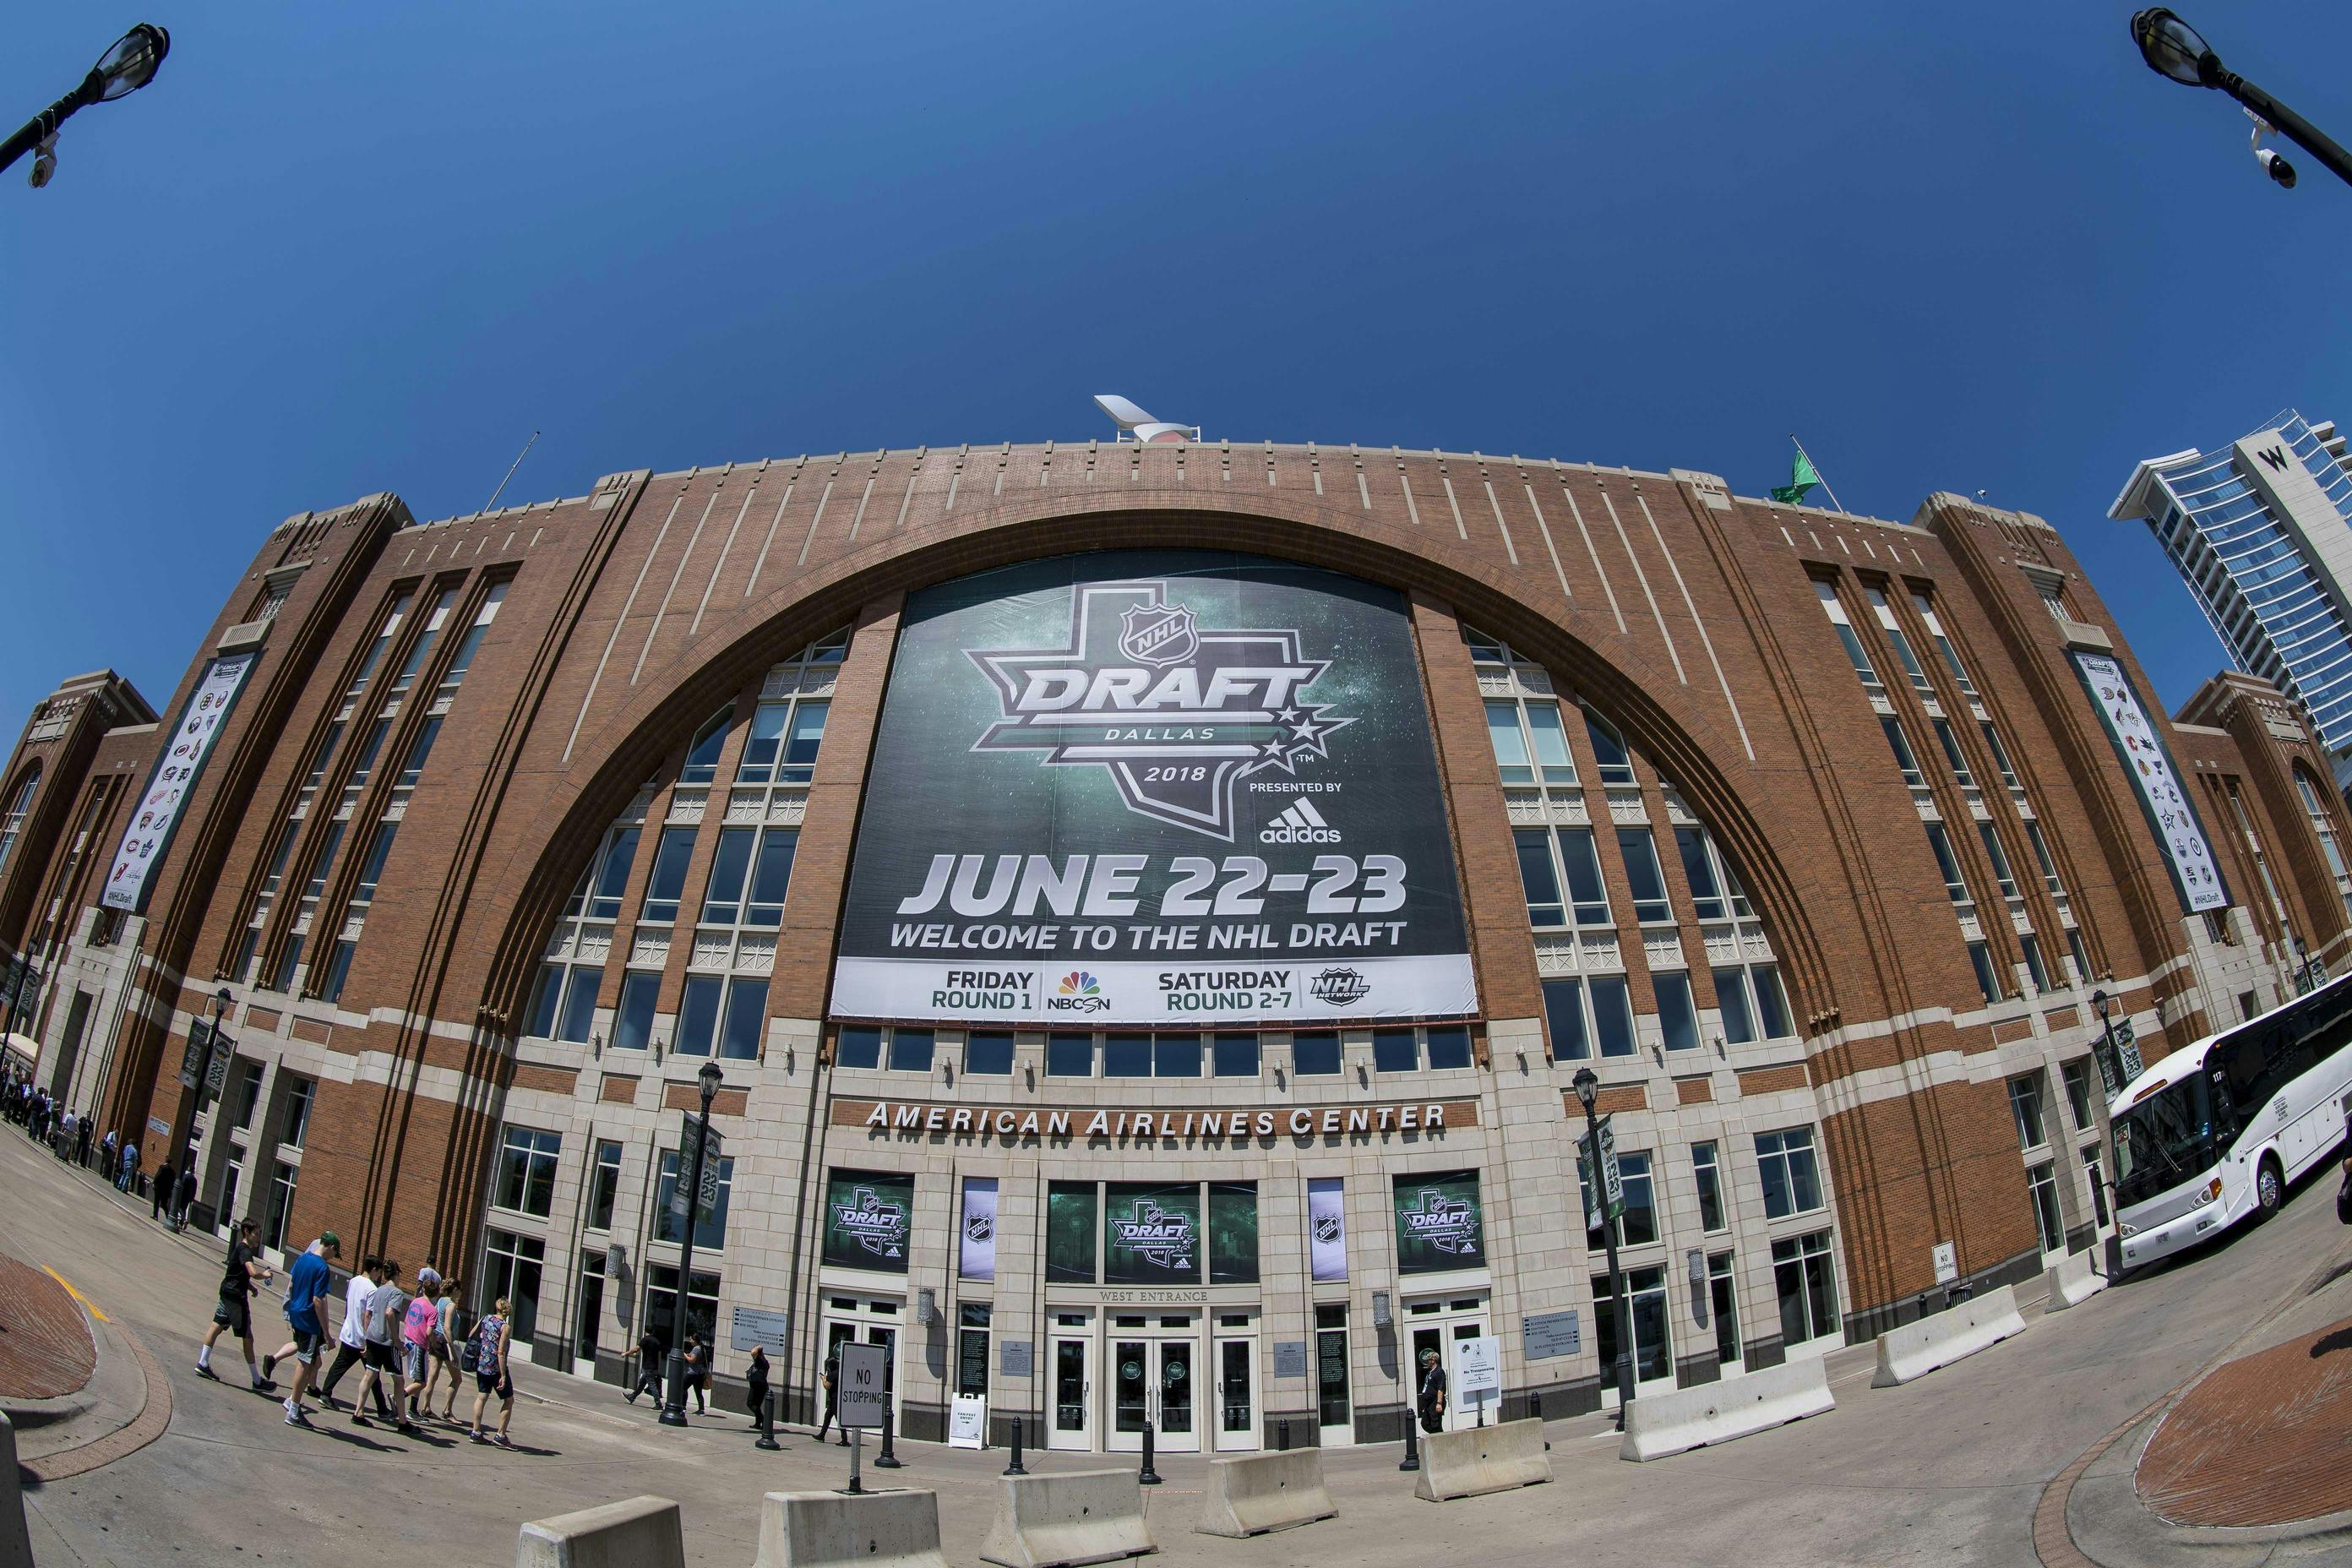 Dallas Stars to host 2018 NHL draft at American Airlines Center